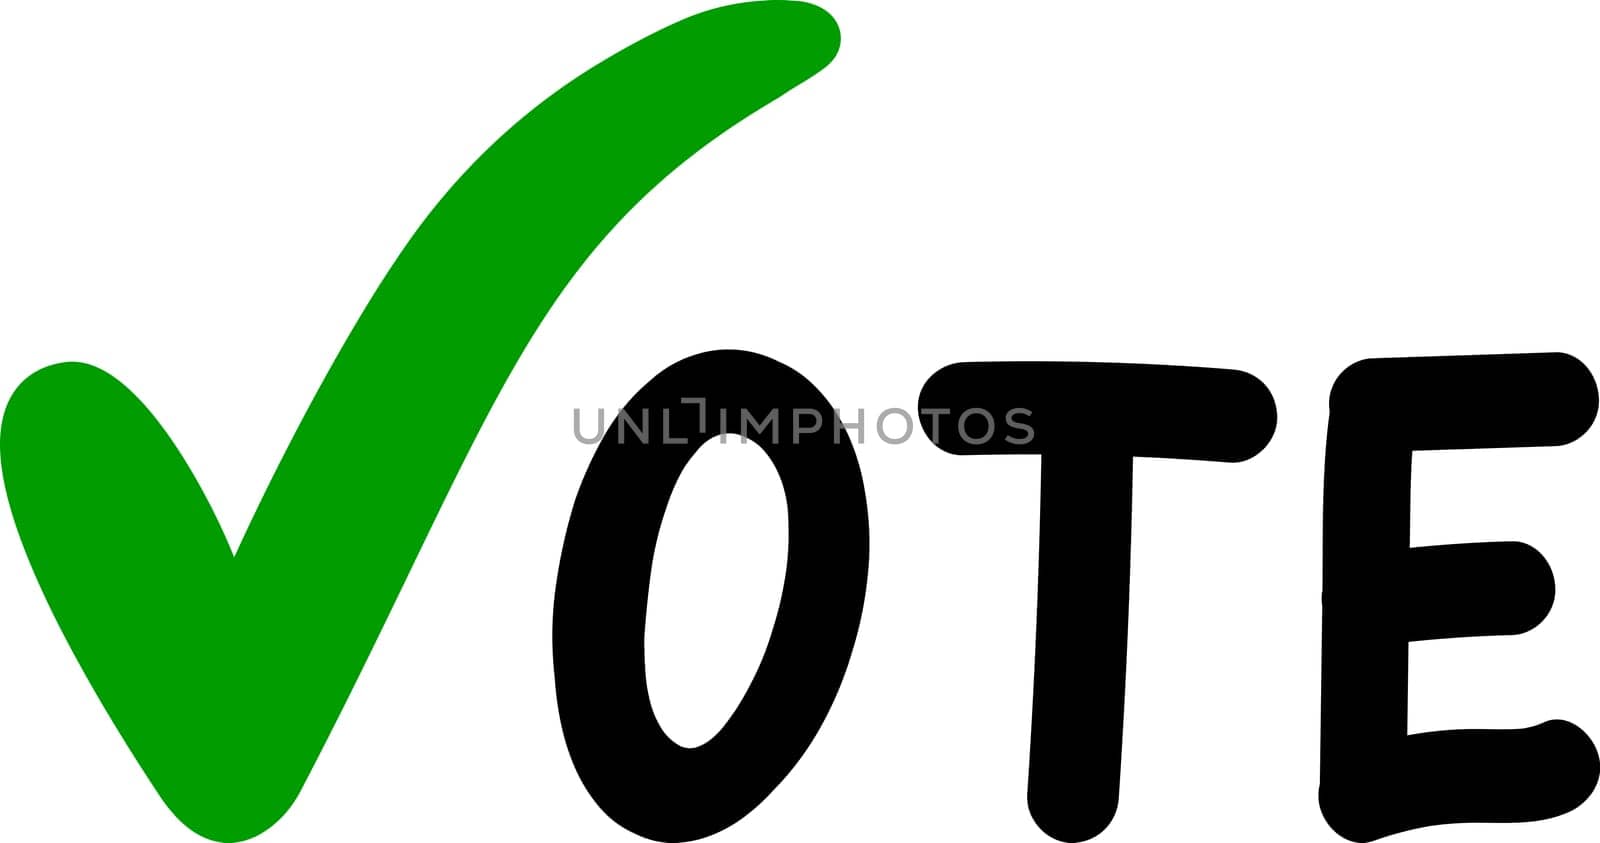 Voting Symbols hands design. Elections icons template.green check marks